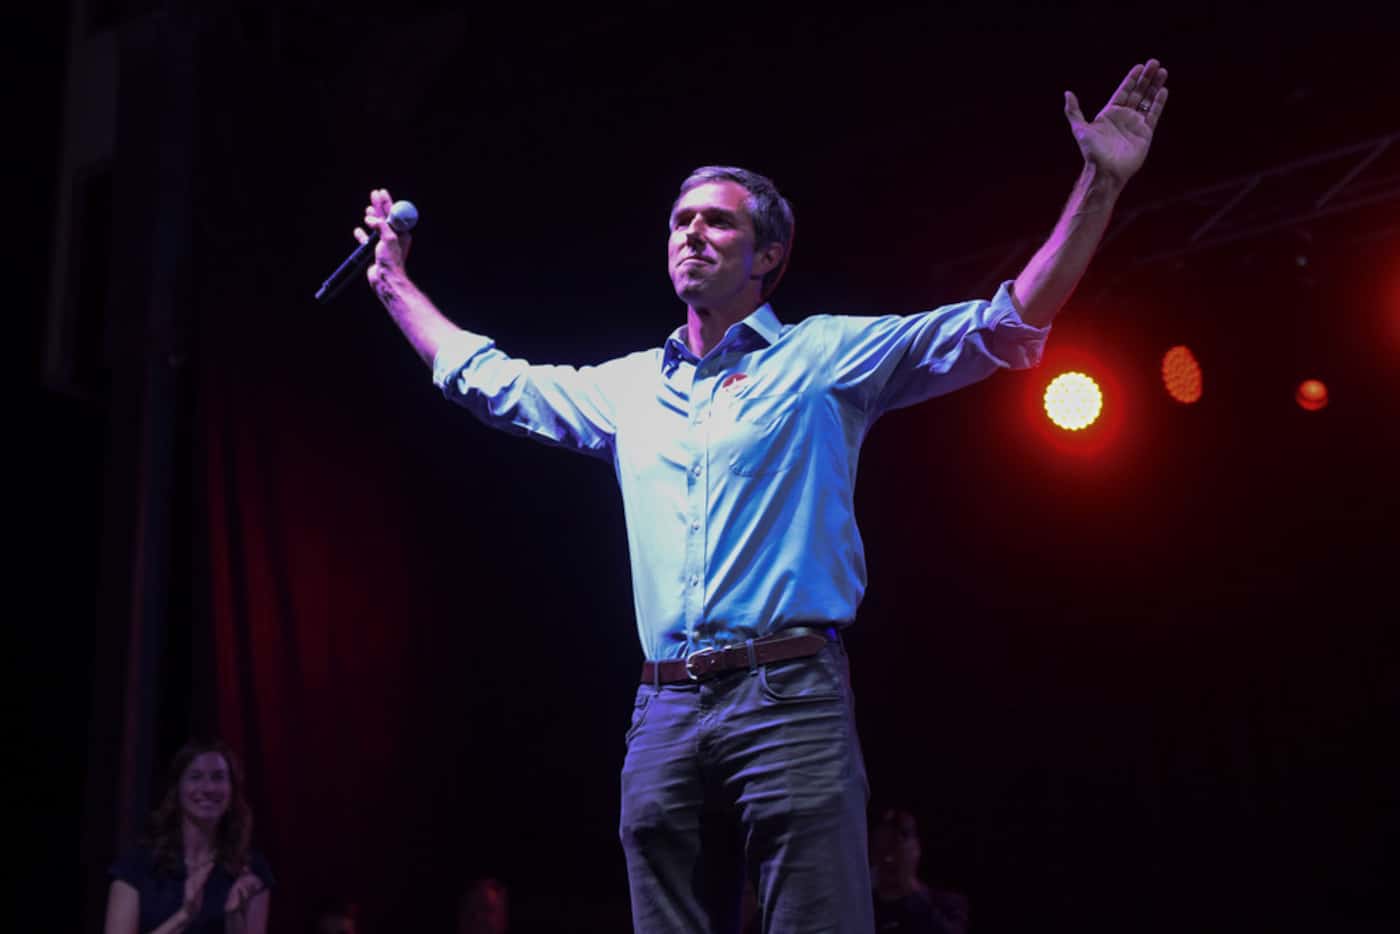 Democratic Senate candidate Beto O'Rourke, following his defeat to incumbent Republican Ted...